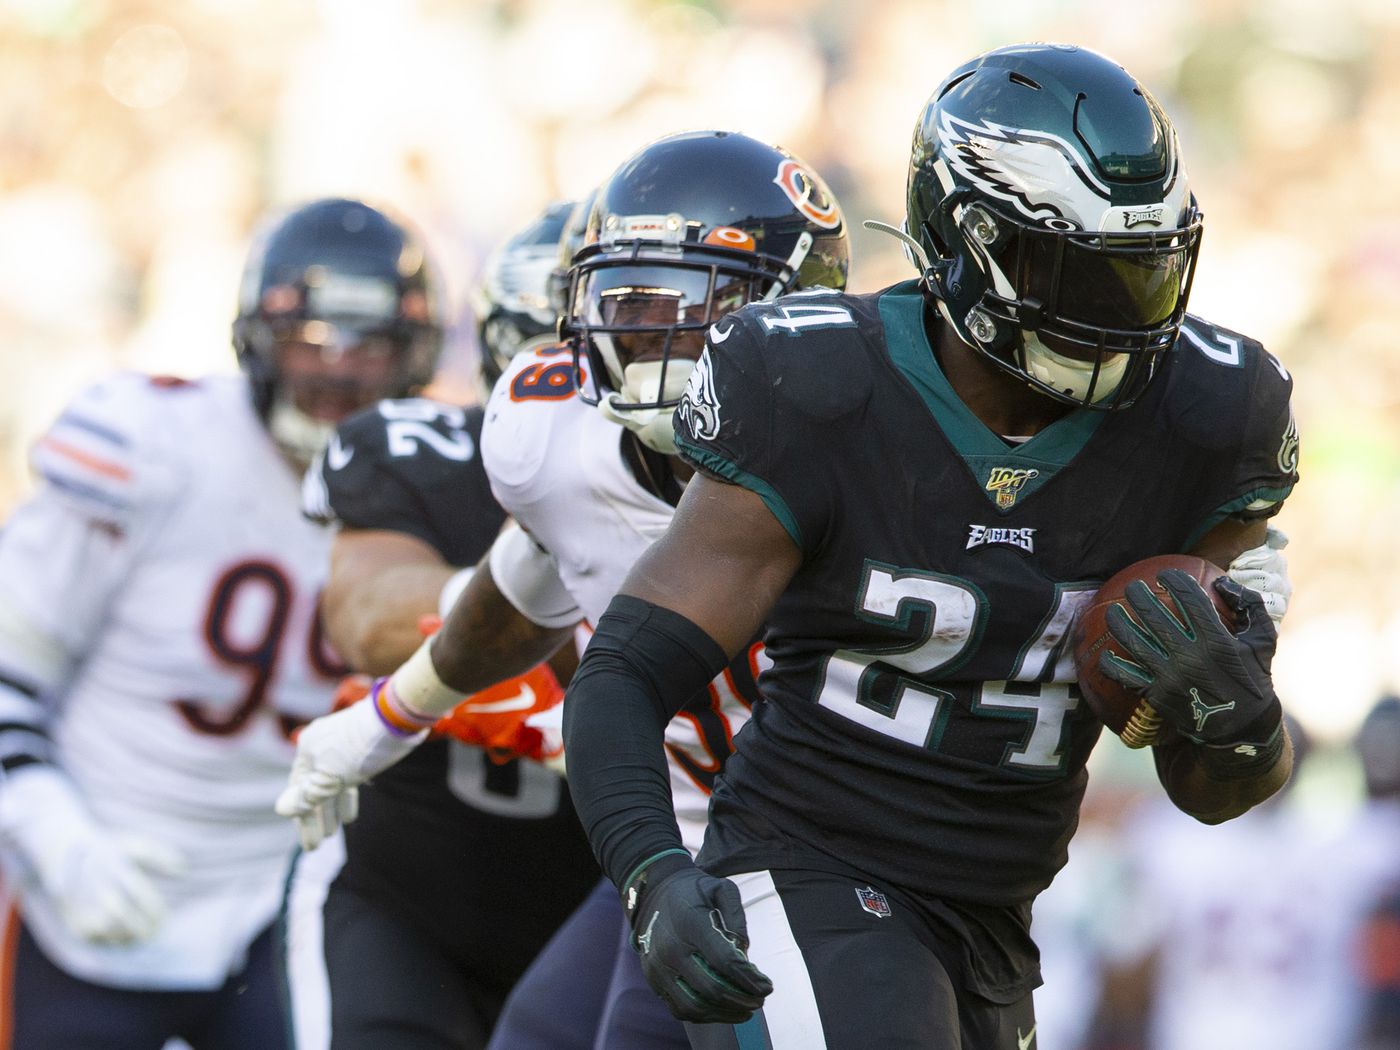 Jordan Howard has his third different jersey number with the Eagles Green Nation